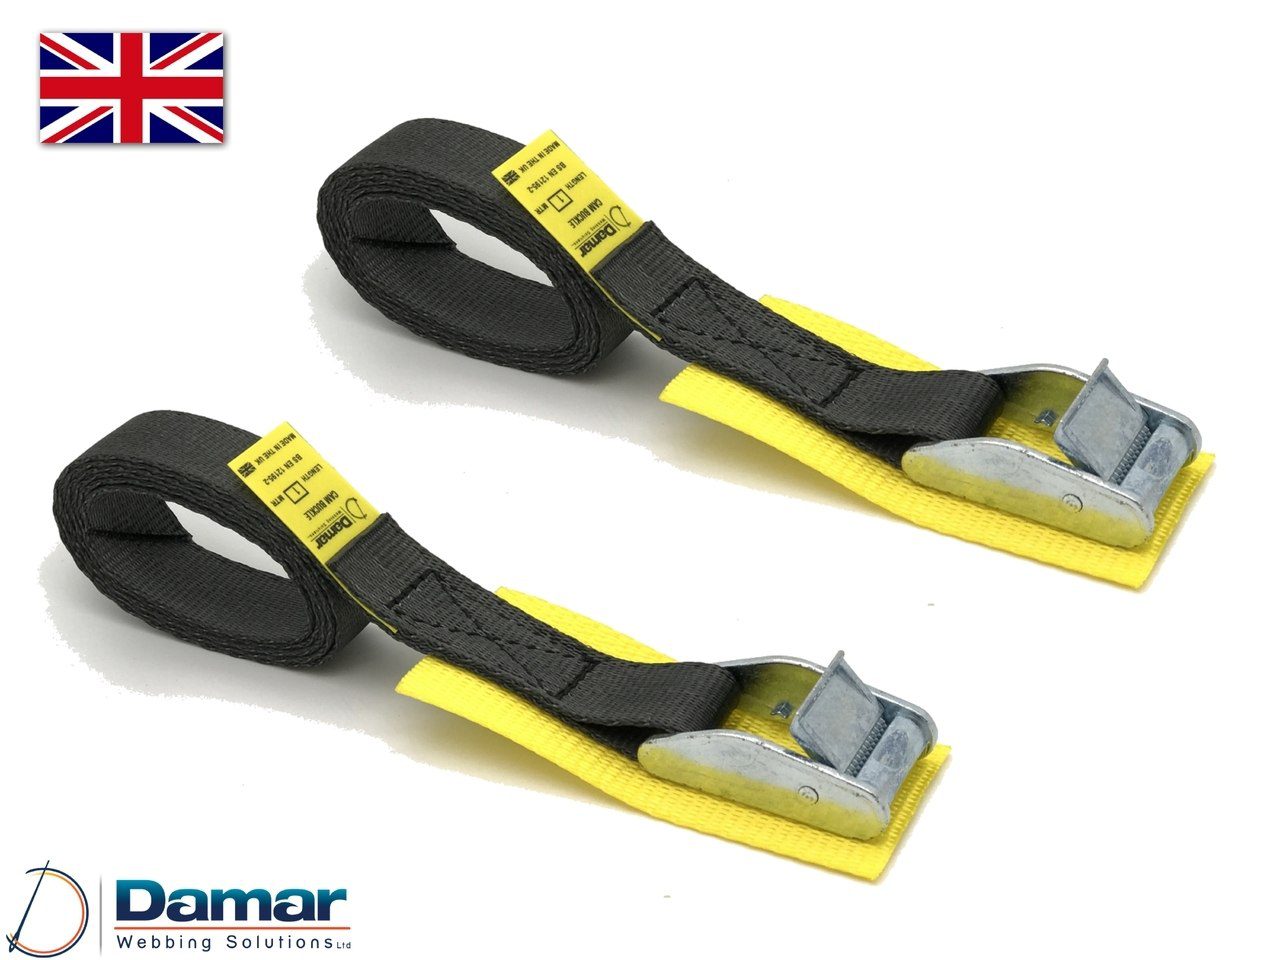 Quantity 2 - Cam buckle tie down straps With protection pad 25mm wide 2mtr long BLACK - Damar Webbing Solutions Ltd